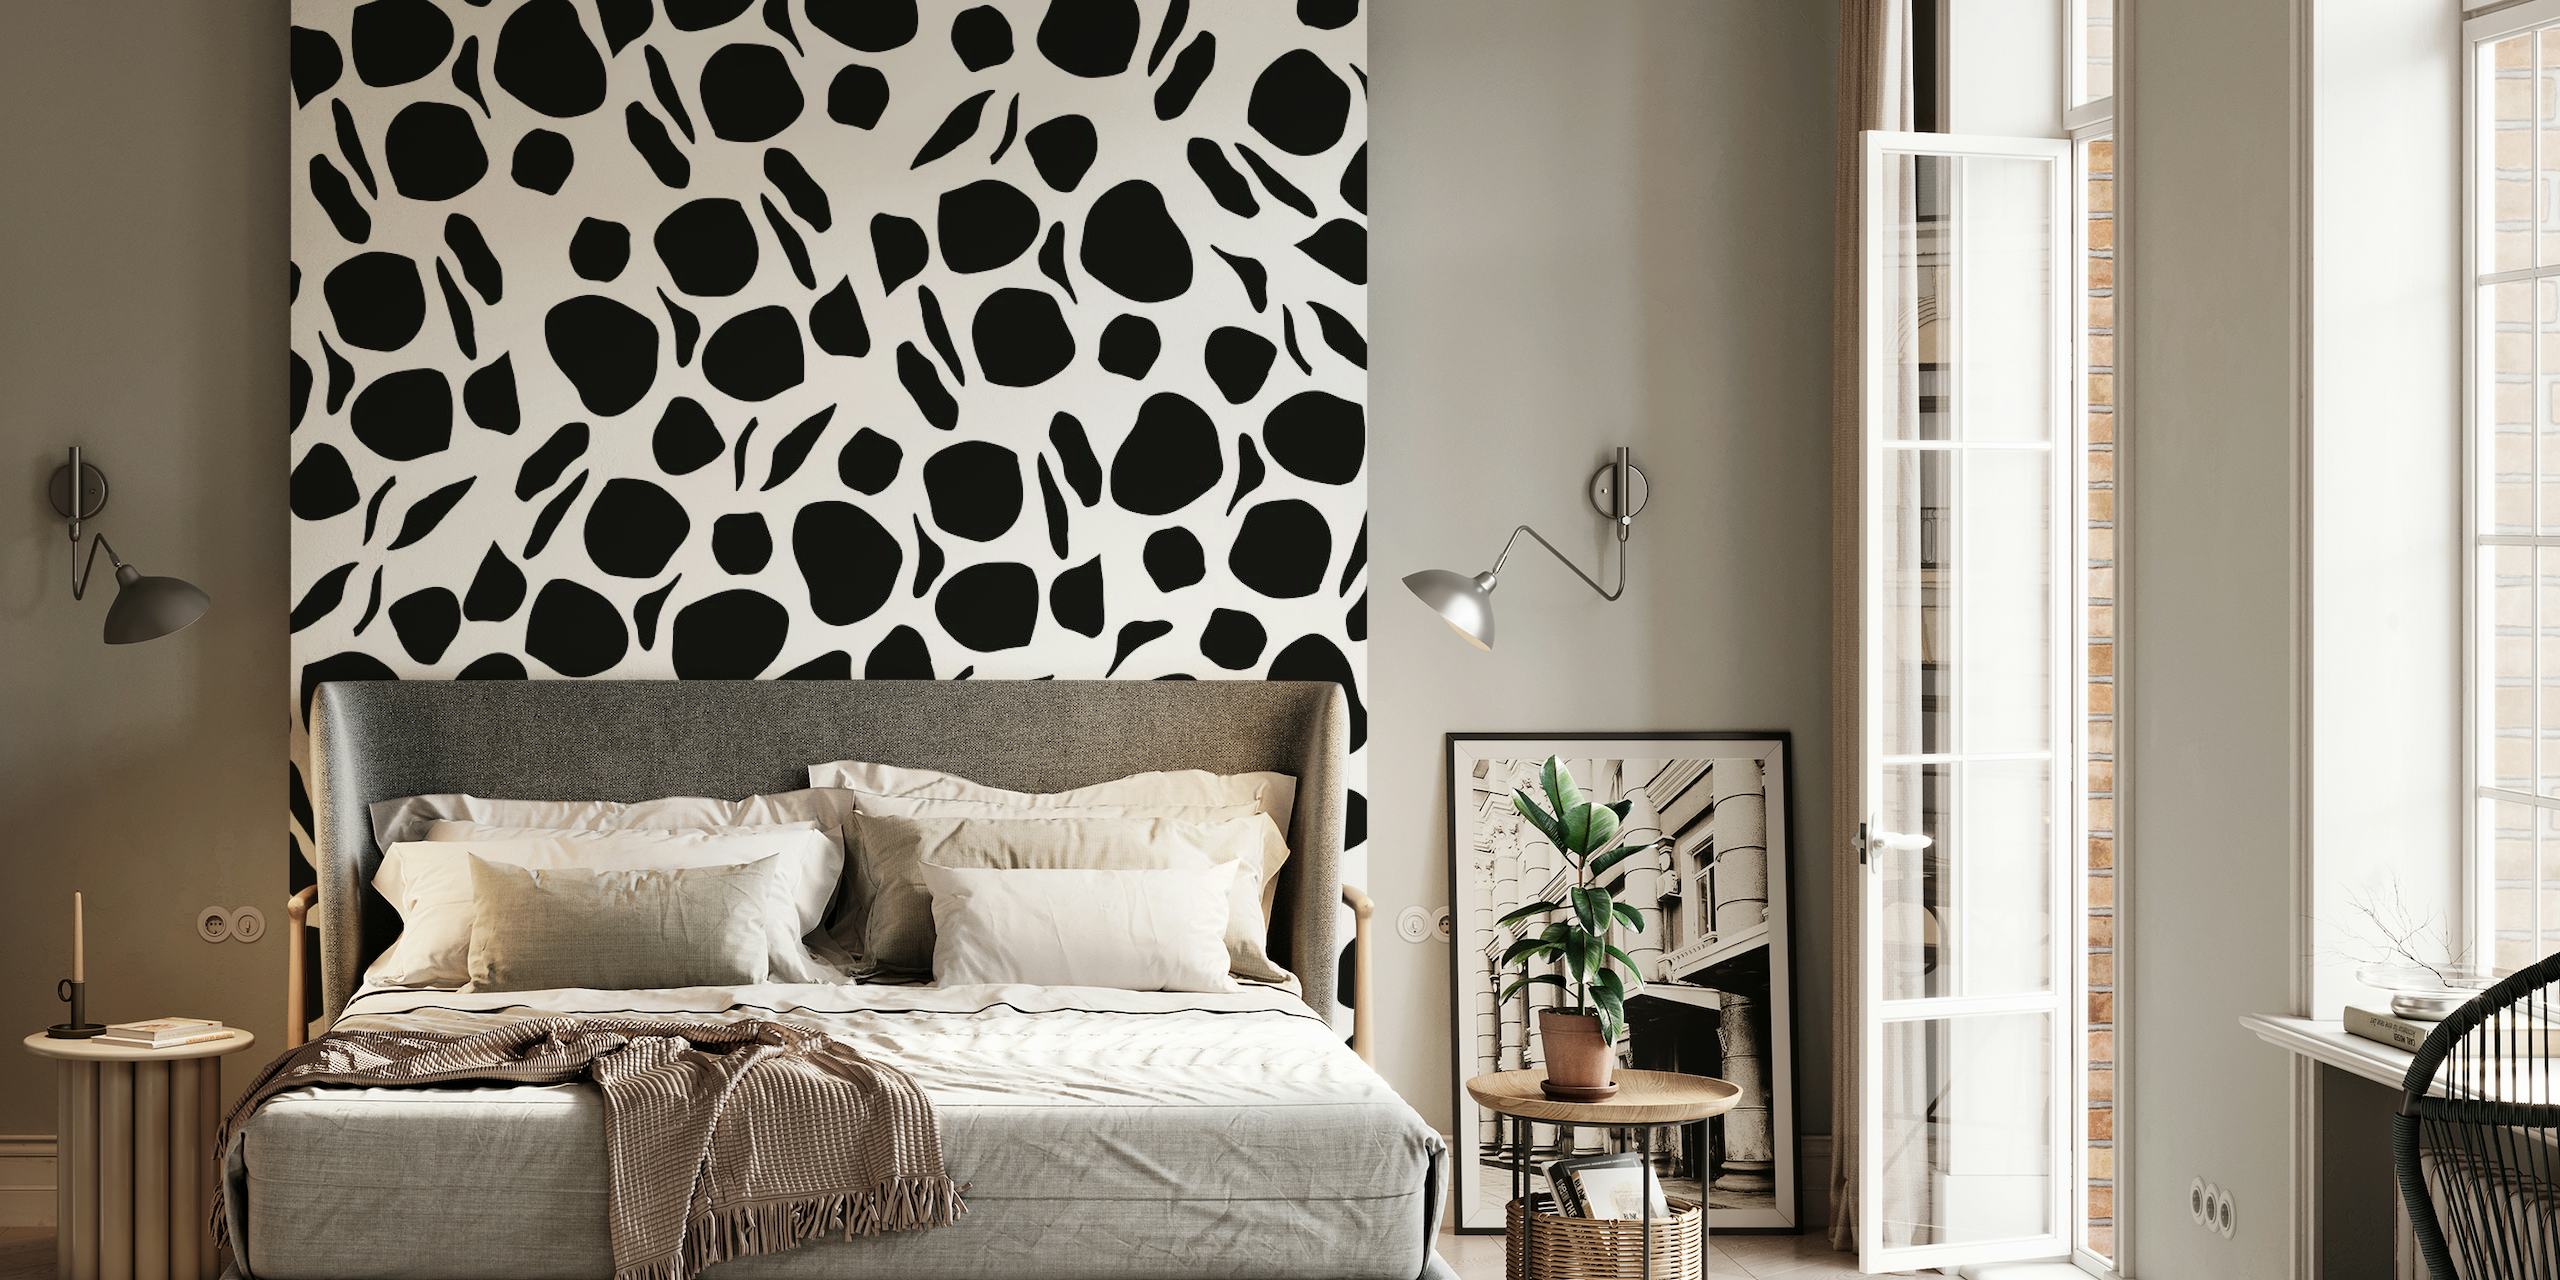 Chic black and white animal print wall mural